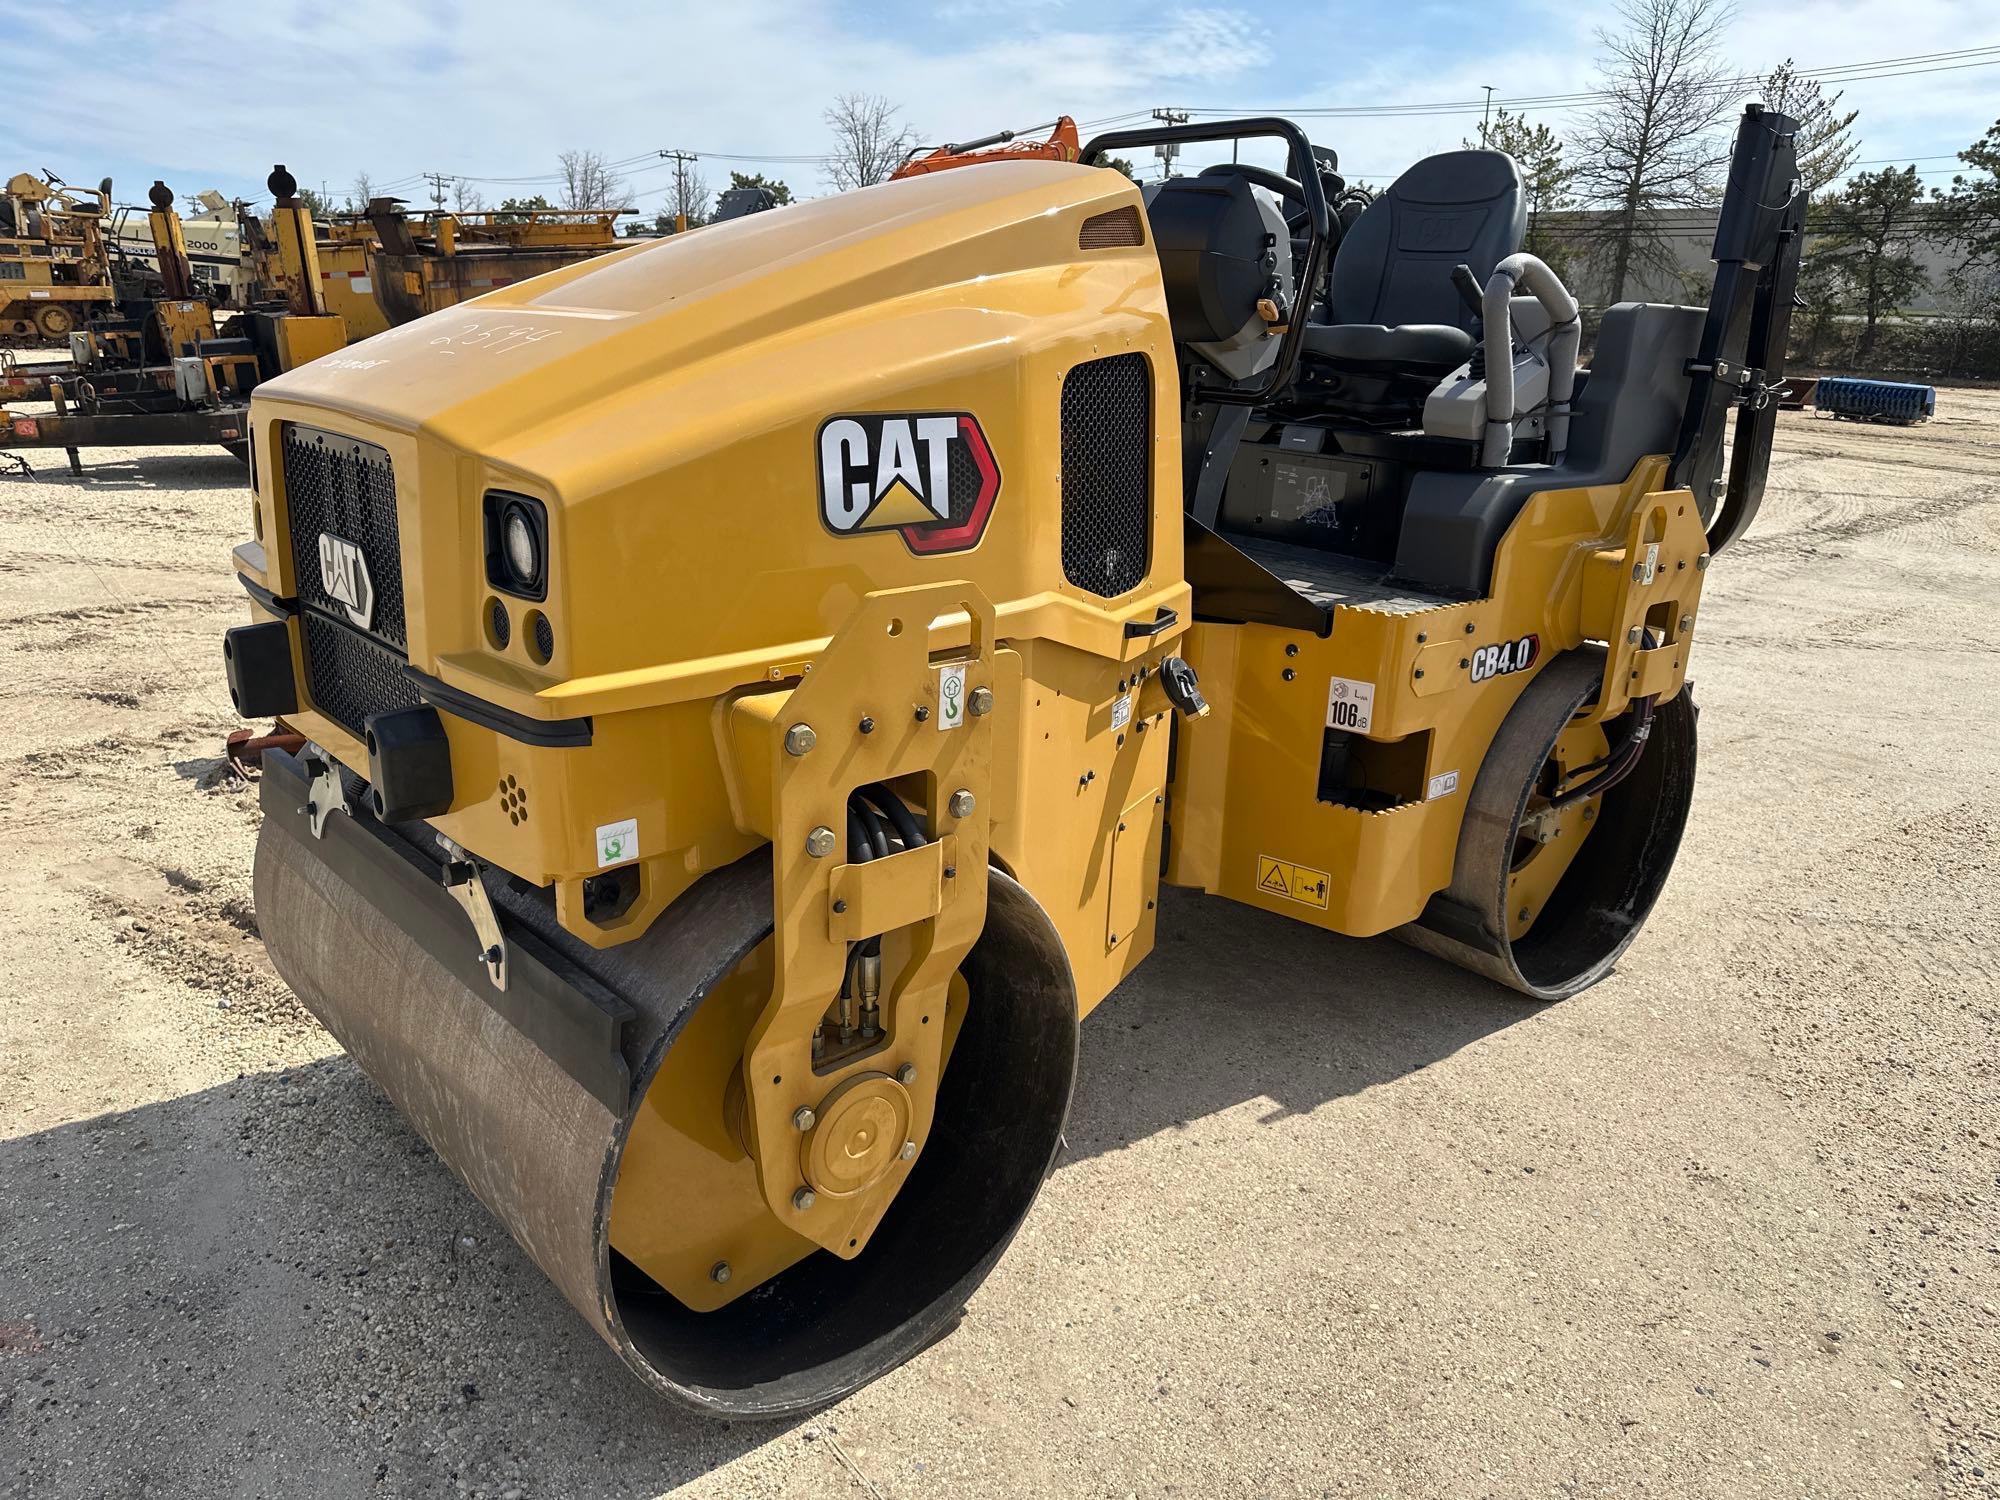 NEW UNUSED CAT CB4.0 ASPHALT ROLLER SN-900808... powered by Cat diesel engine, 48hp, equipped with